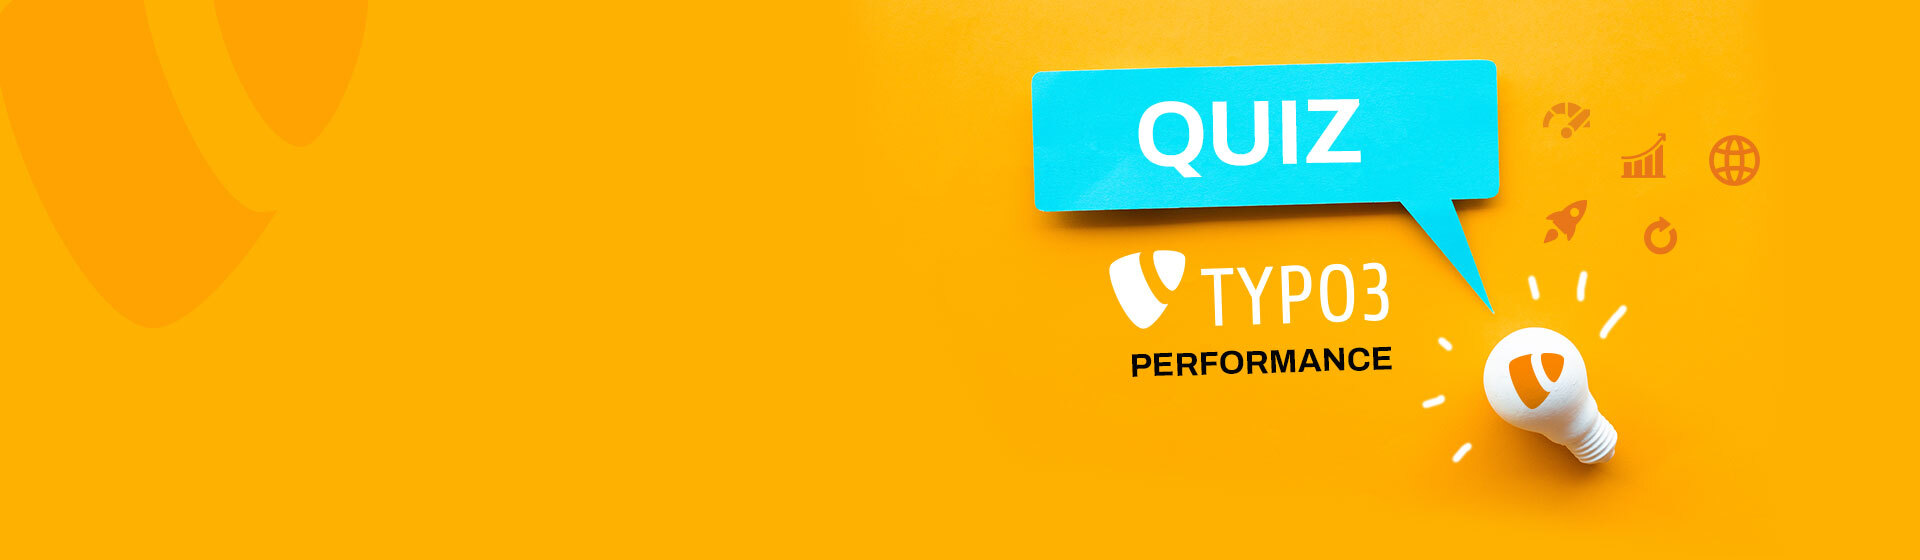 How Well Do You Know About TYPO3 Performance?